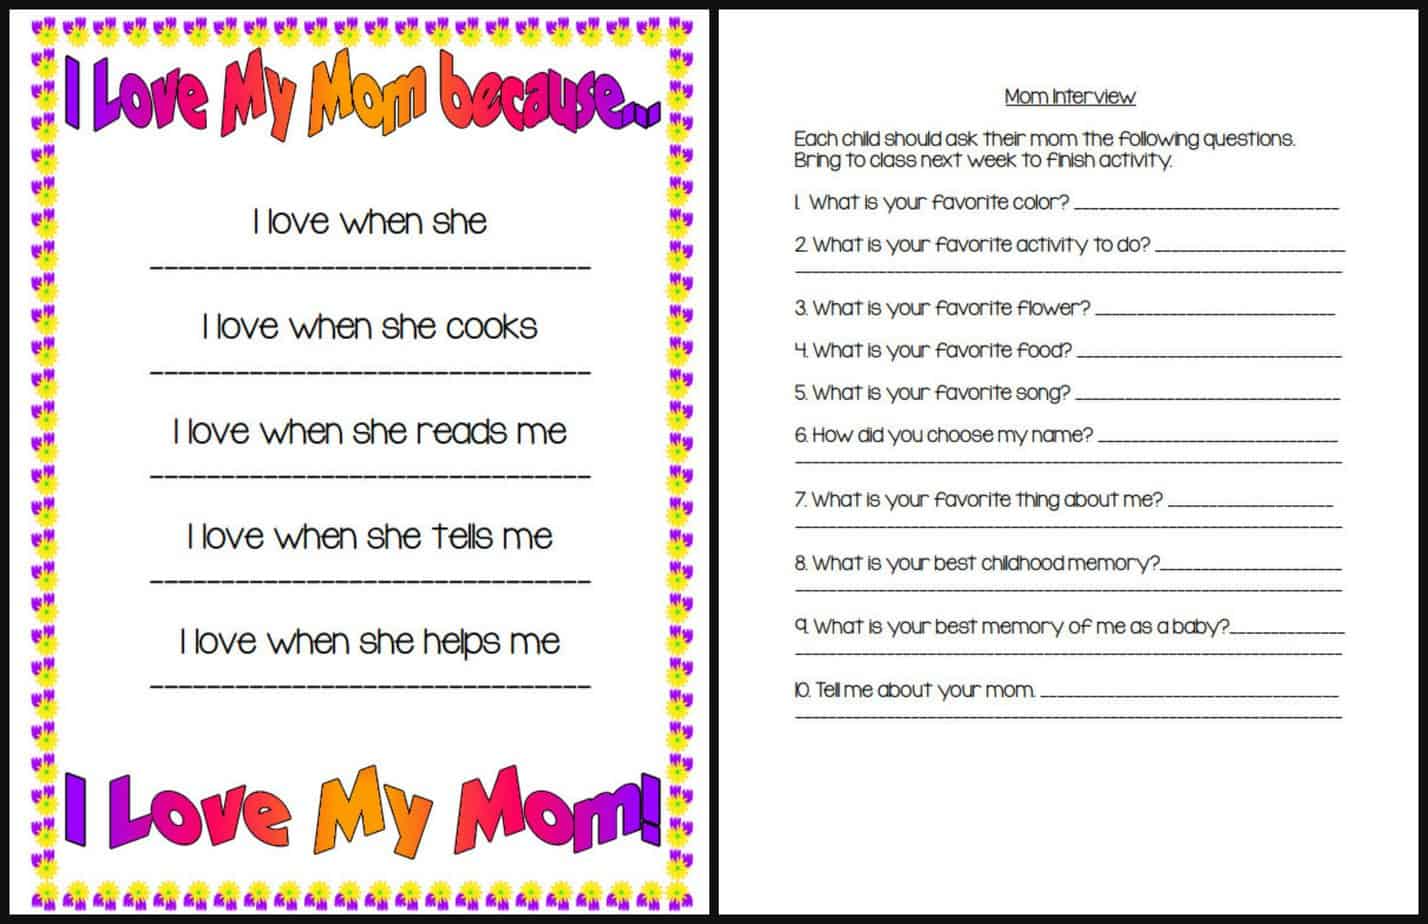 mother-s-day-interview-easy-printable-questions-for-kids